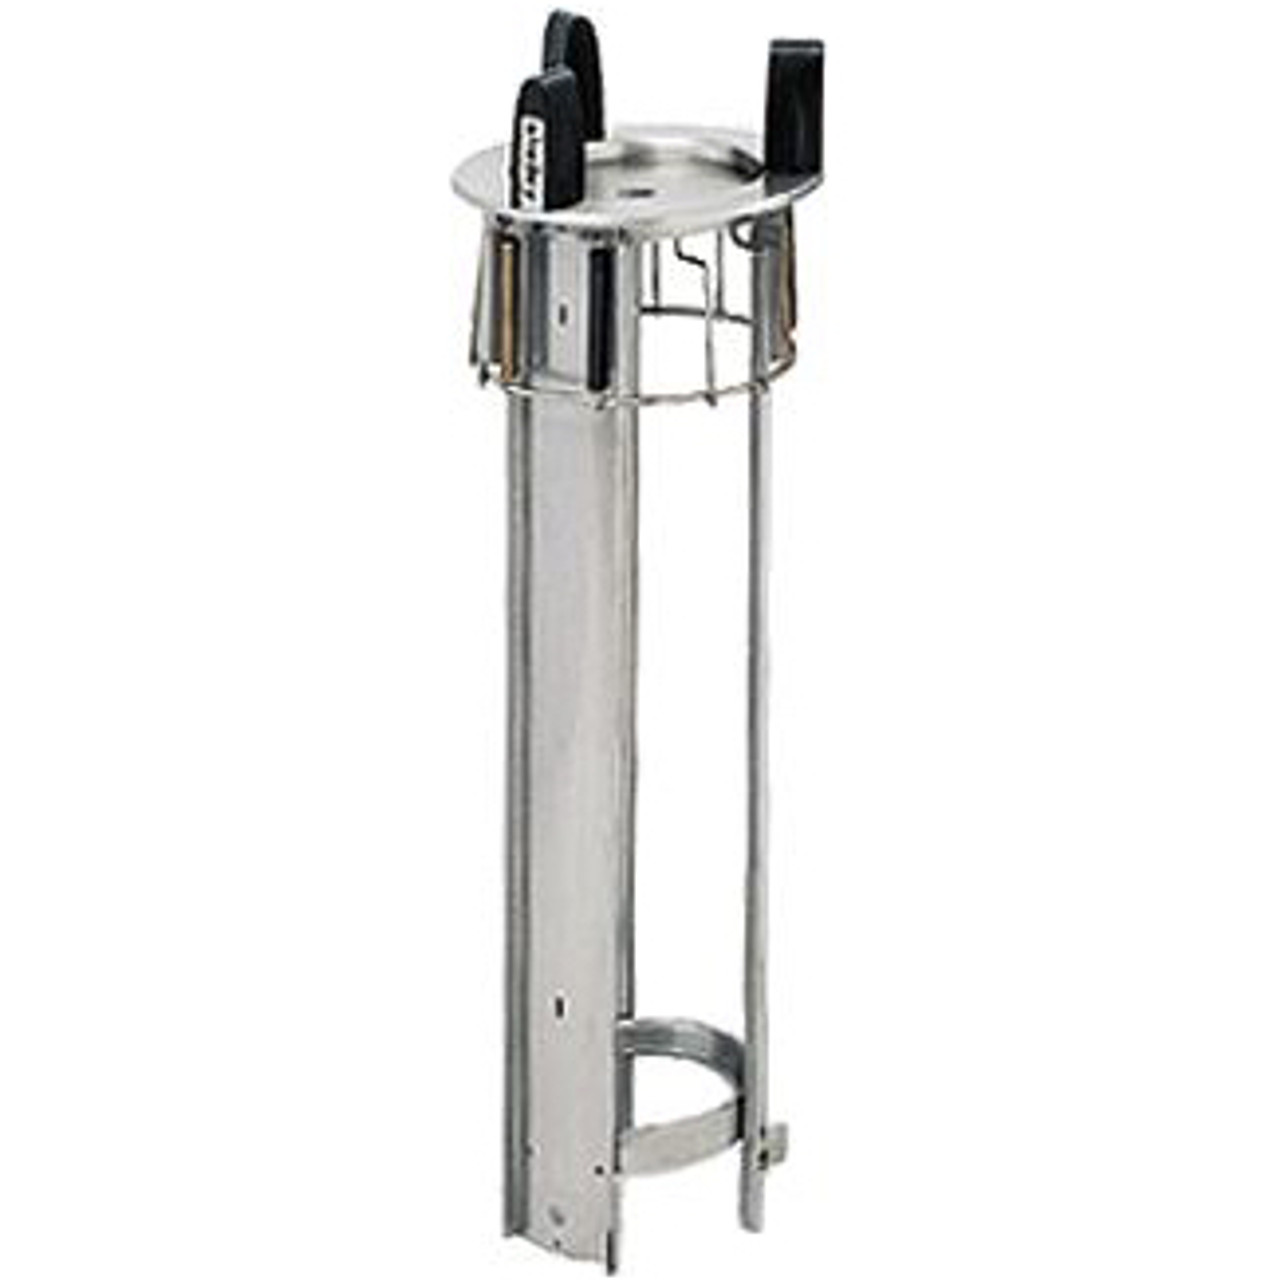 Delfield DIS-725-ET Heated (1) Drop In Tube Plate Dispenser - 7.25" Max